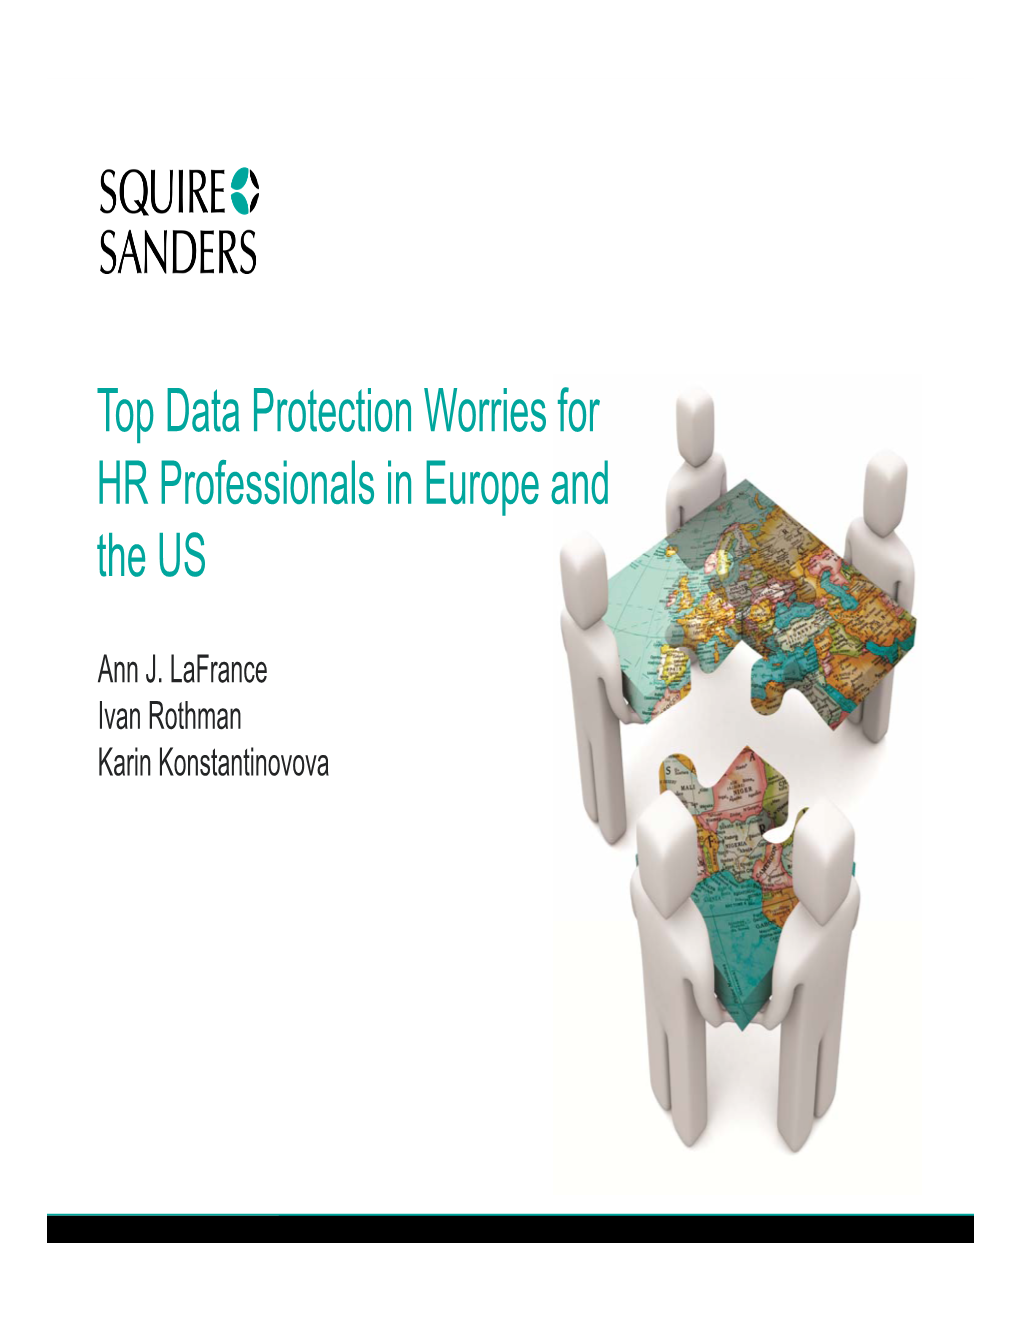 Top Data Protection Worries for HR Professionals in Europe and the US